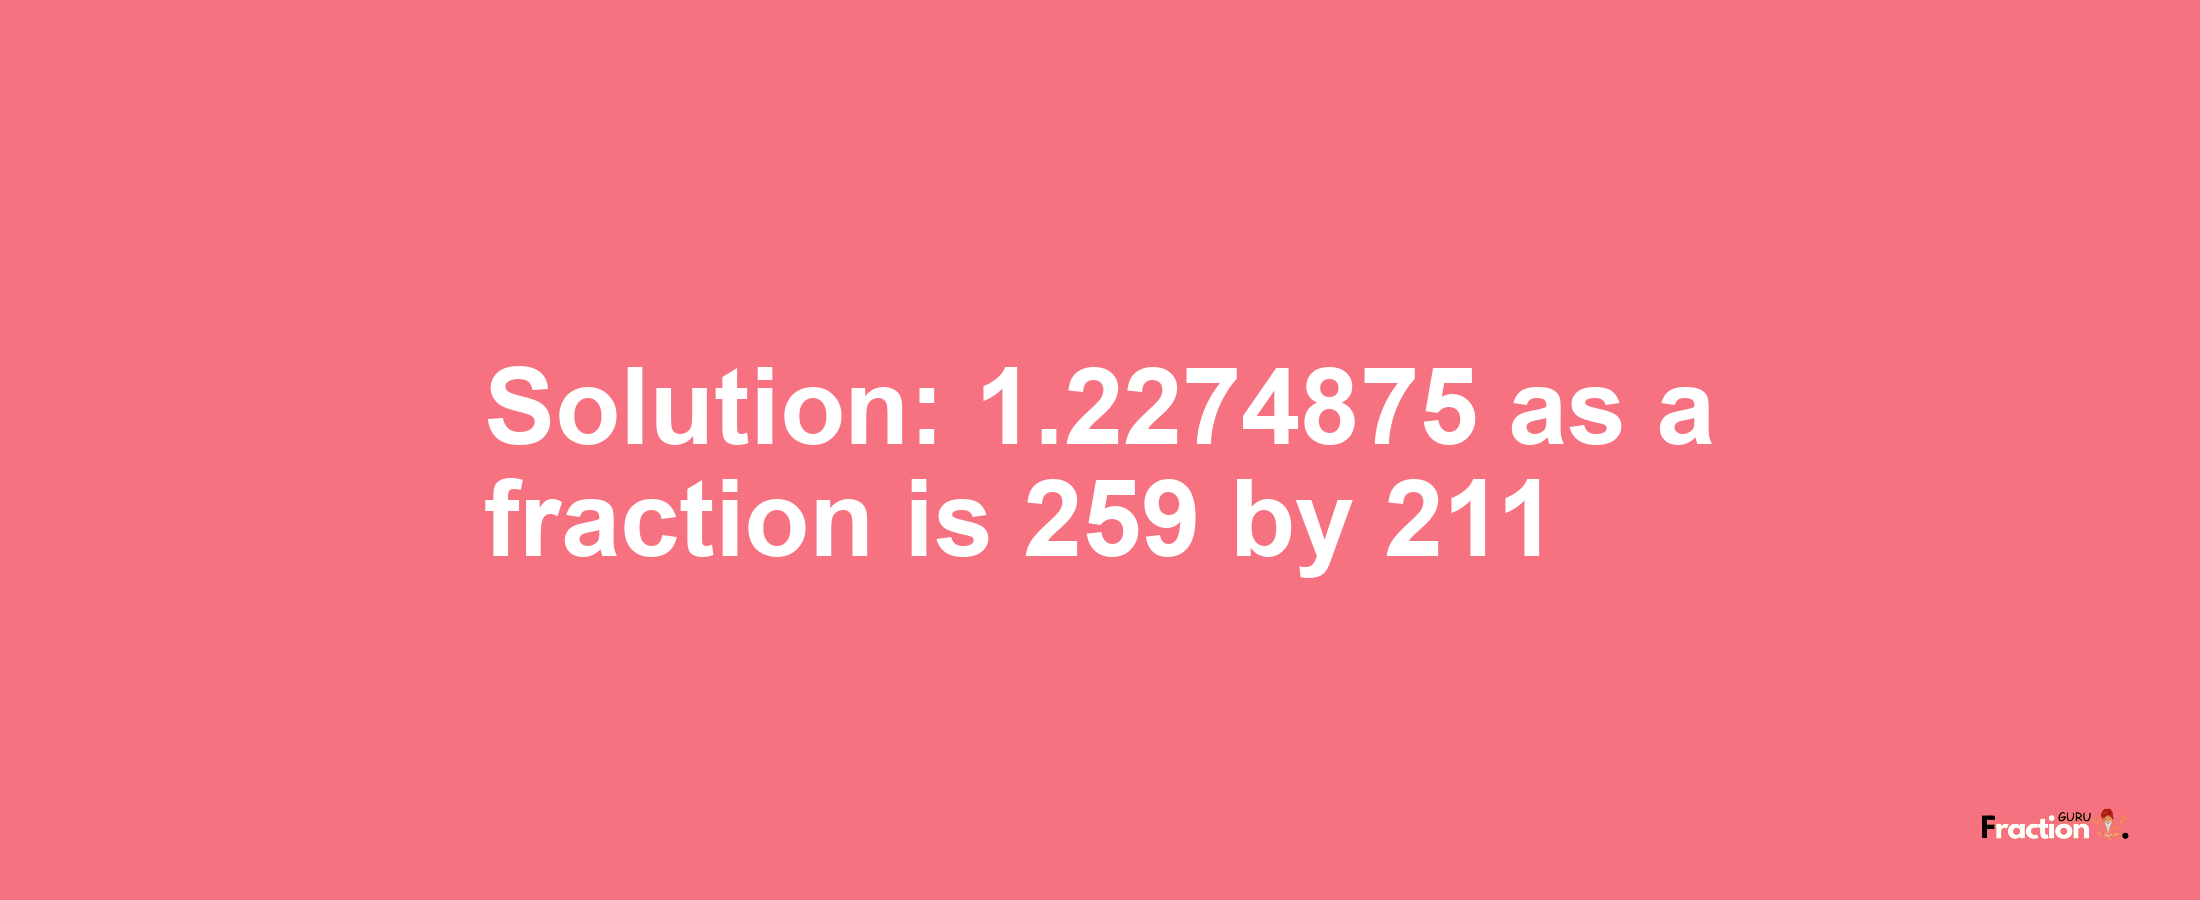 Solution:1.2274875 as a fraction is 259/211